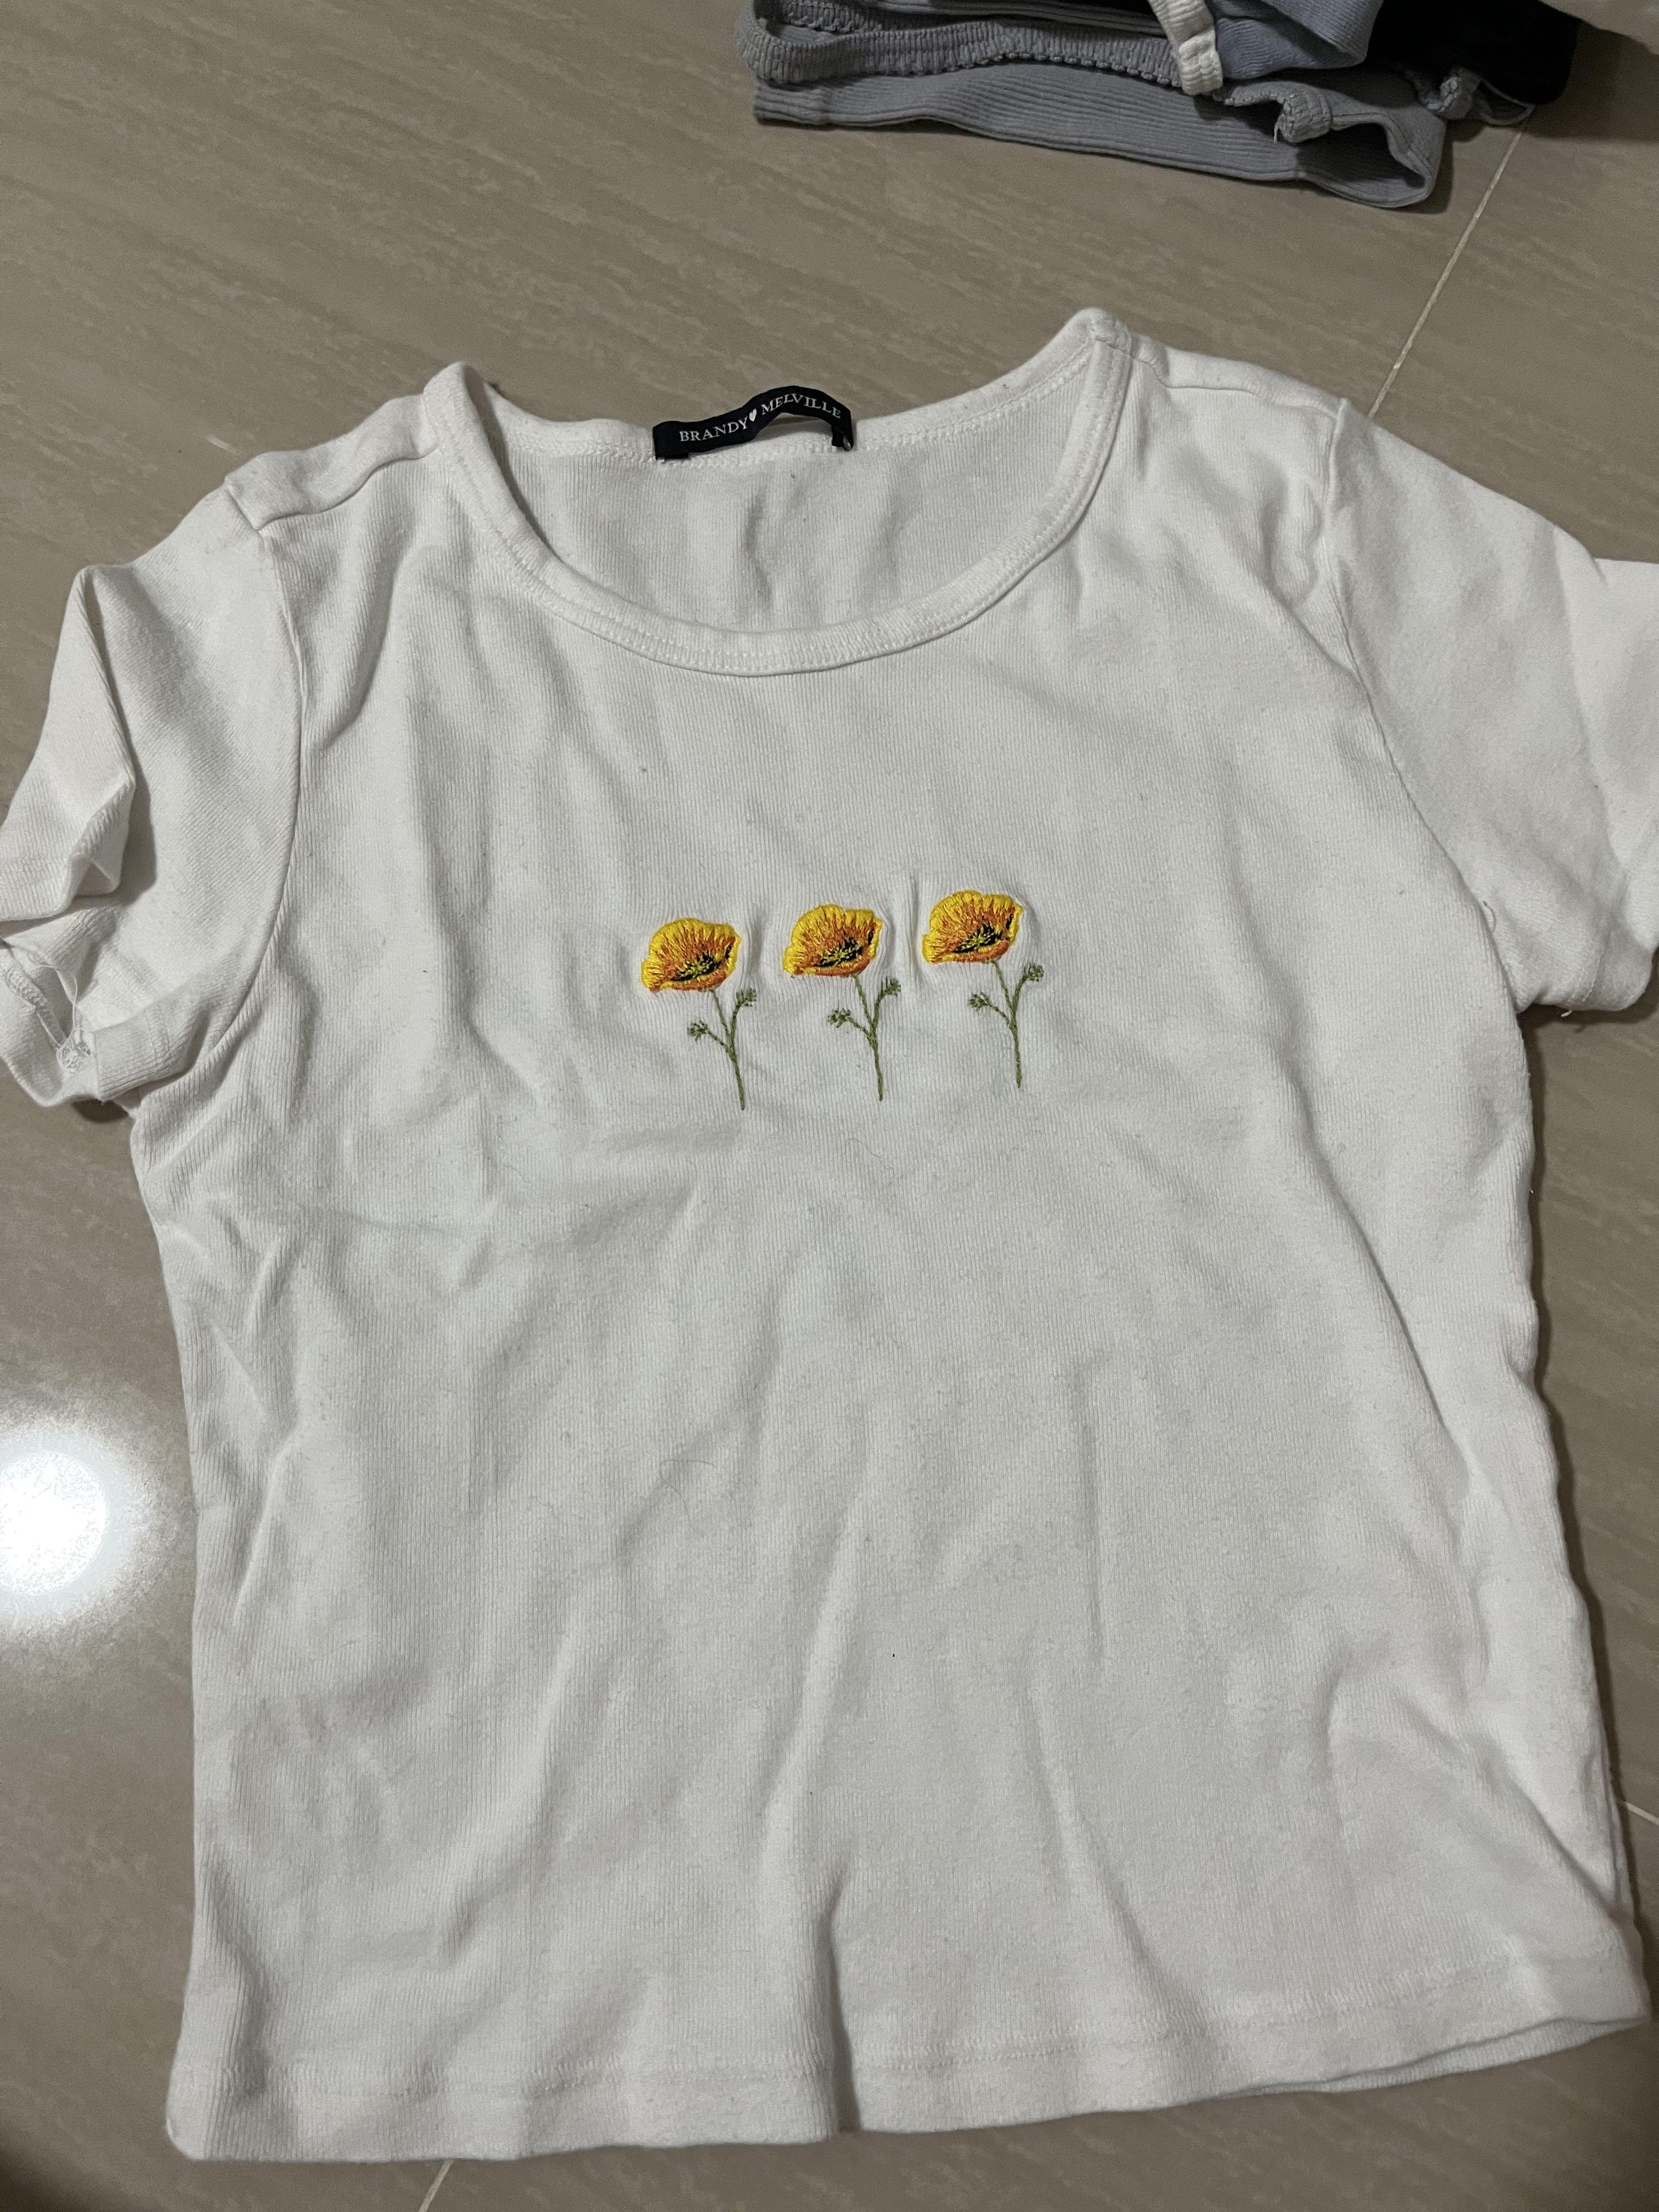 BN Brandy Melville White Poppy Embroidered Floral Top, Women's Fashion, Tops,  Shirts on Carousell